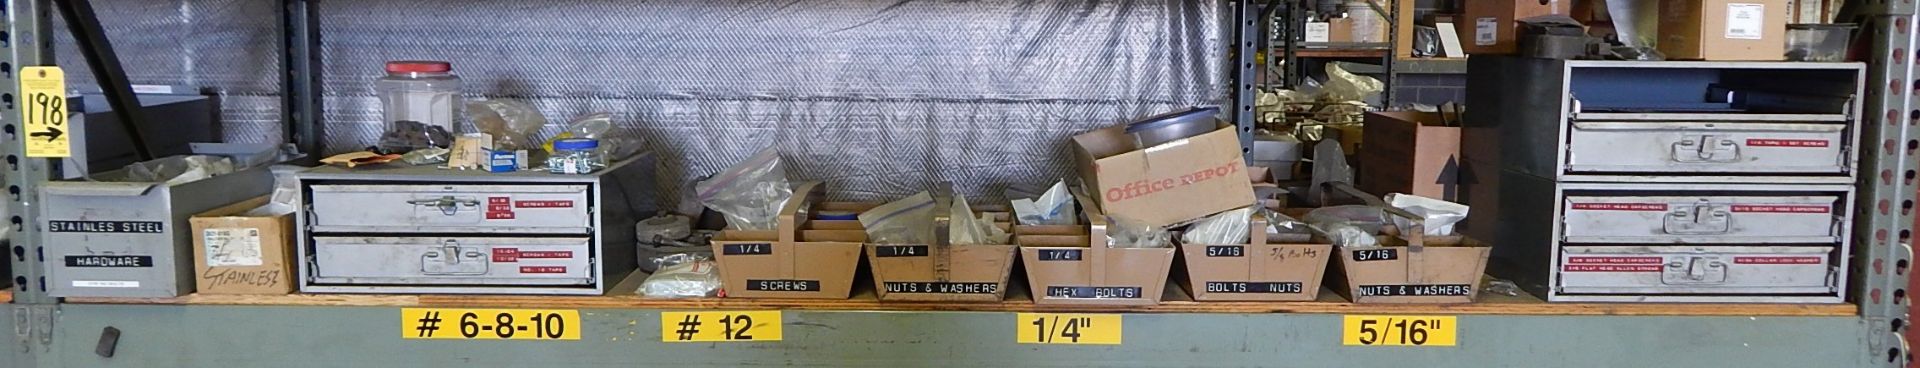 Contents of (1) Shelf of Pallet Shelving